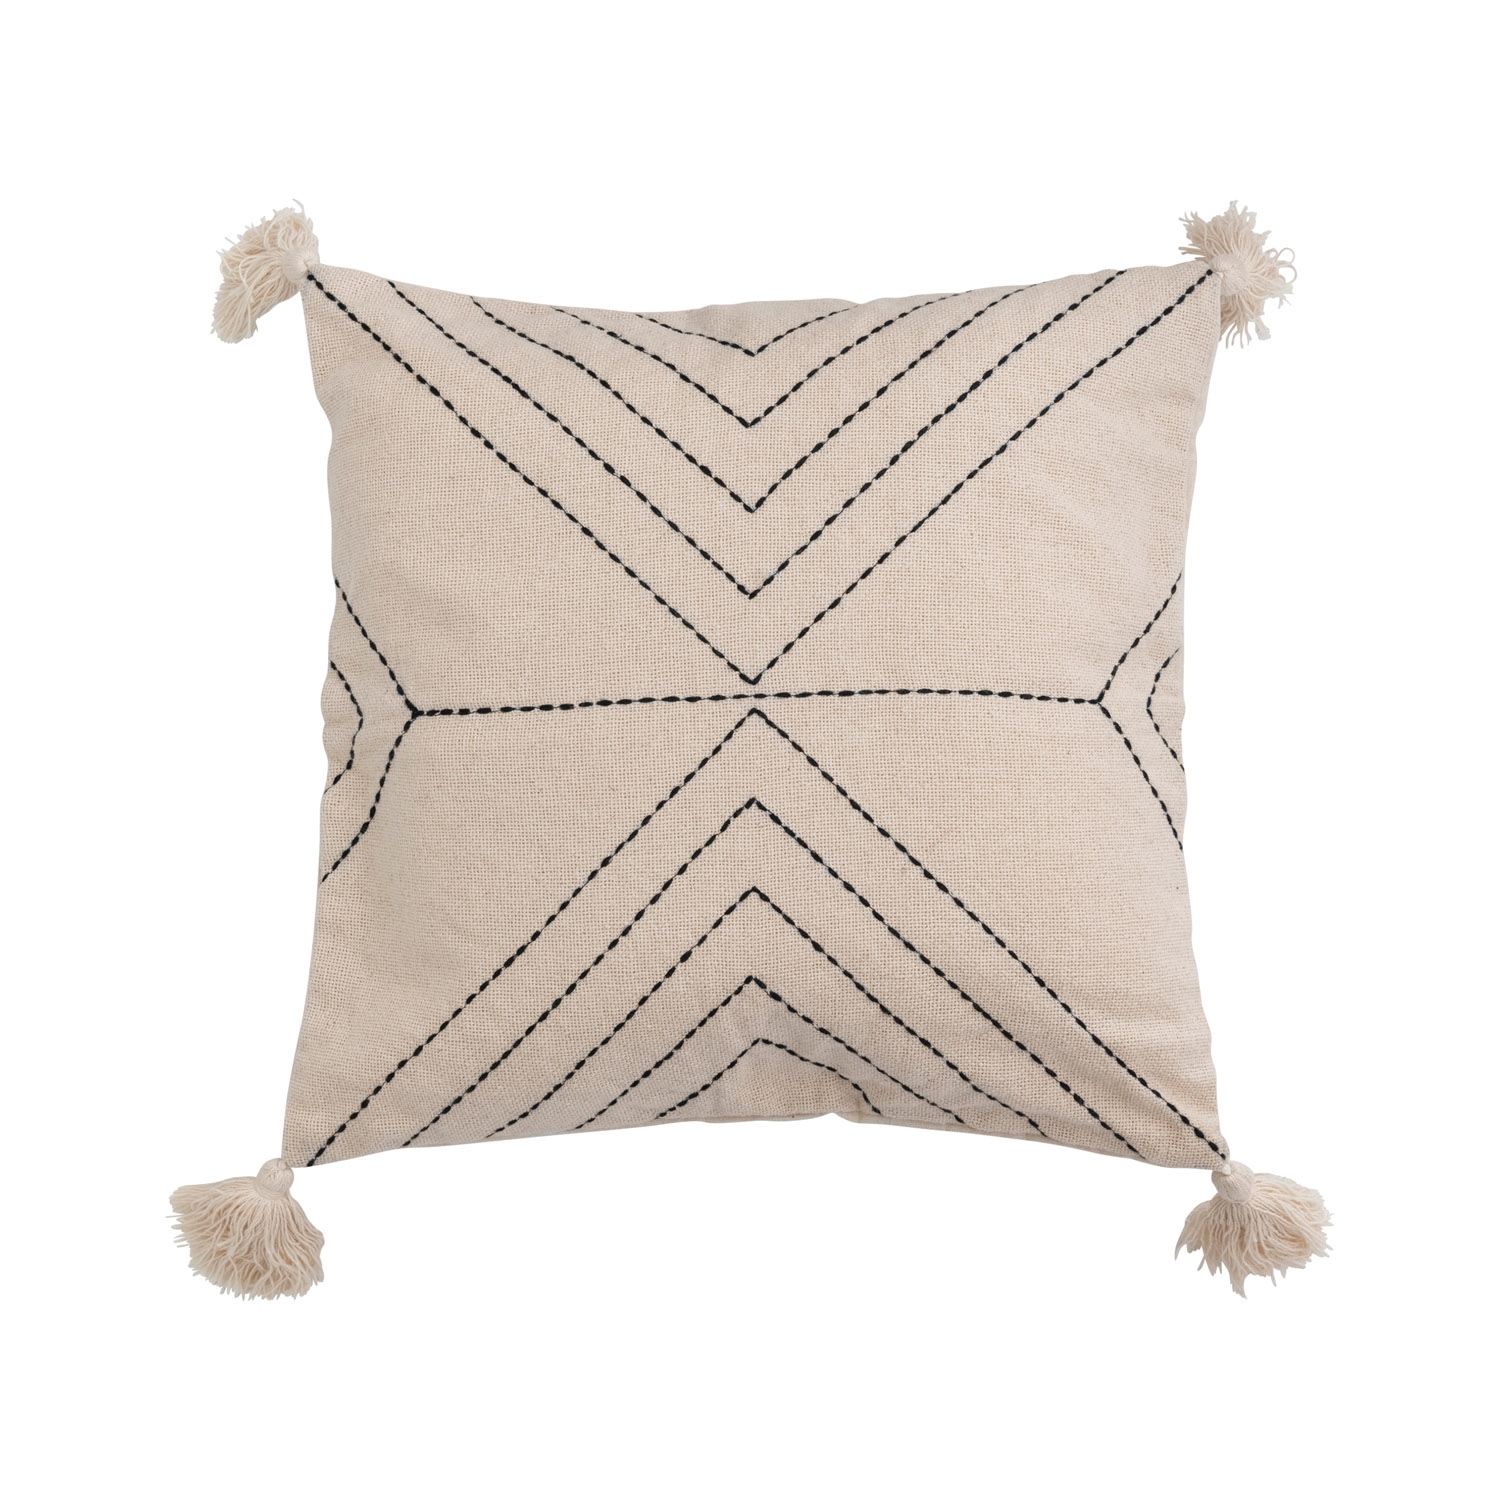 Cotton Blend Embroidered Pillow with Tassels - Image 0